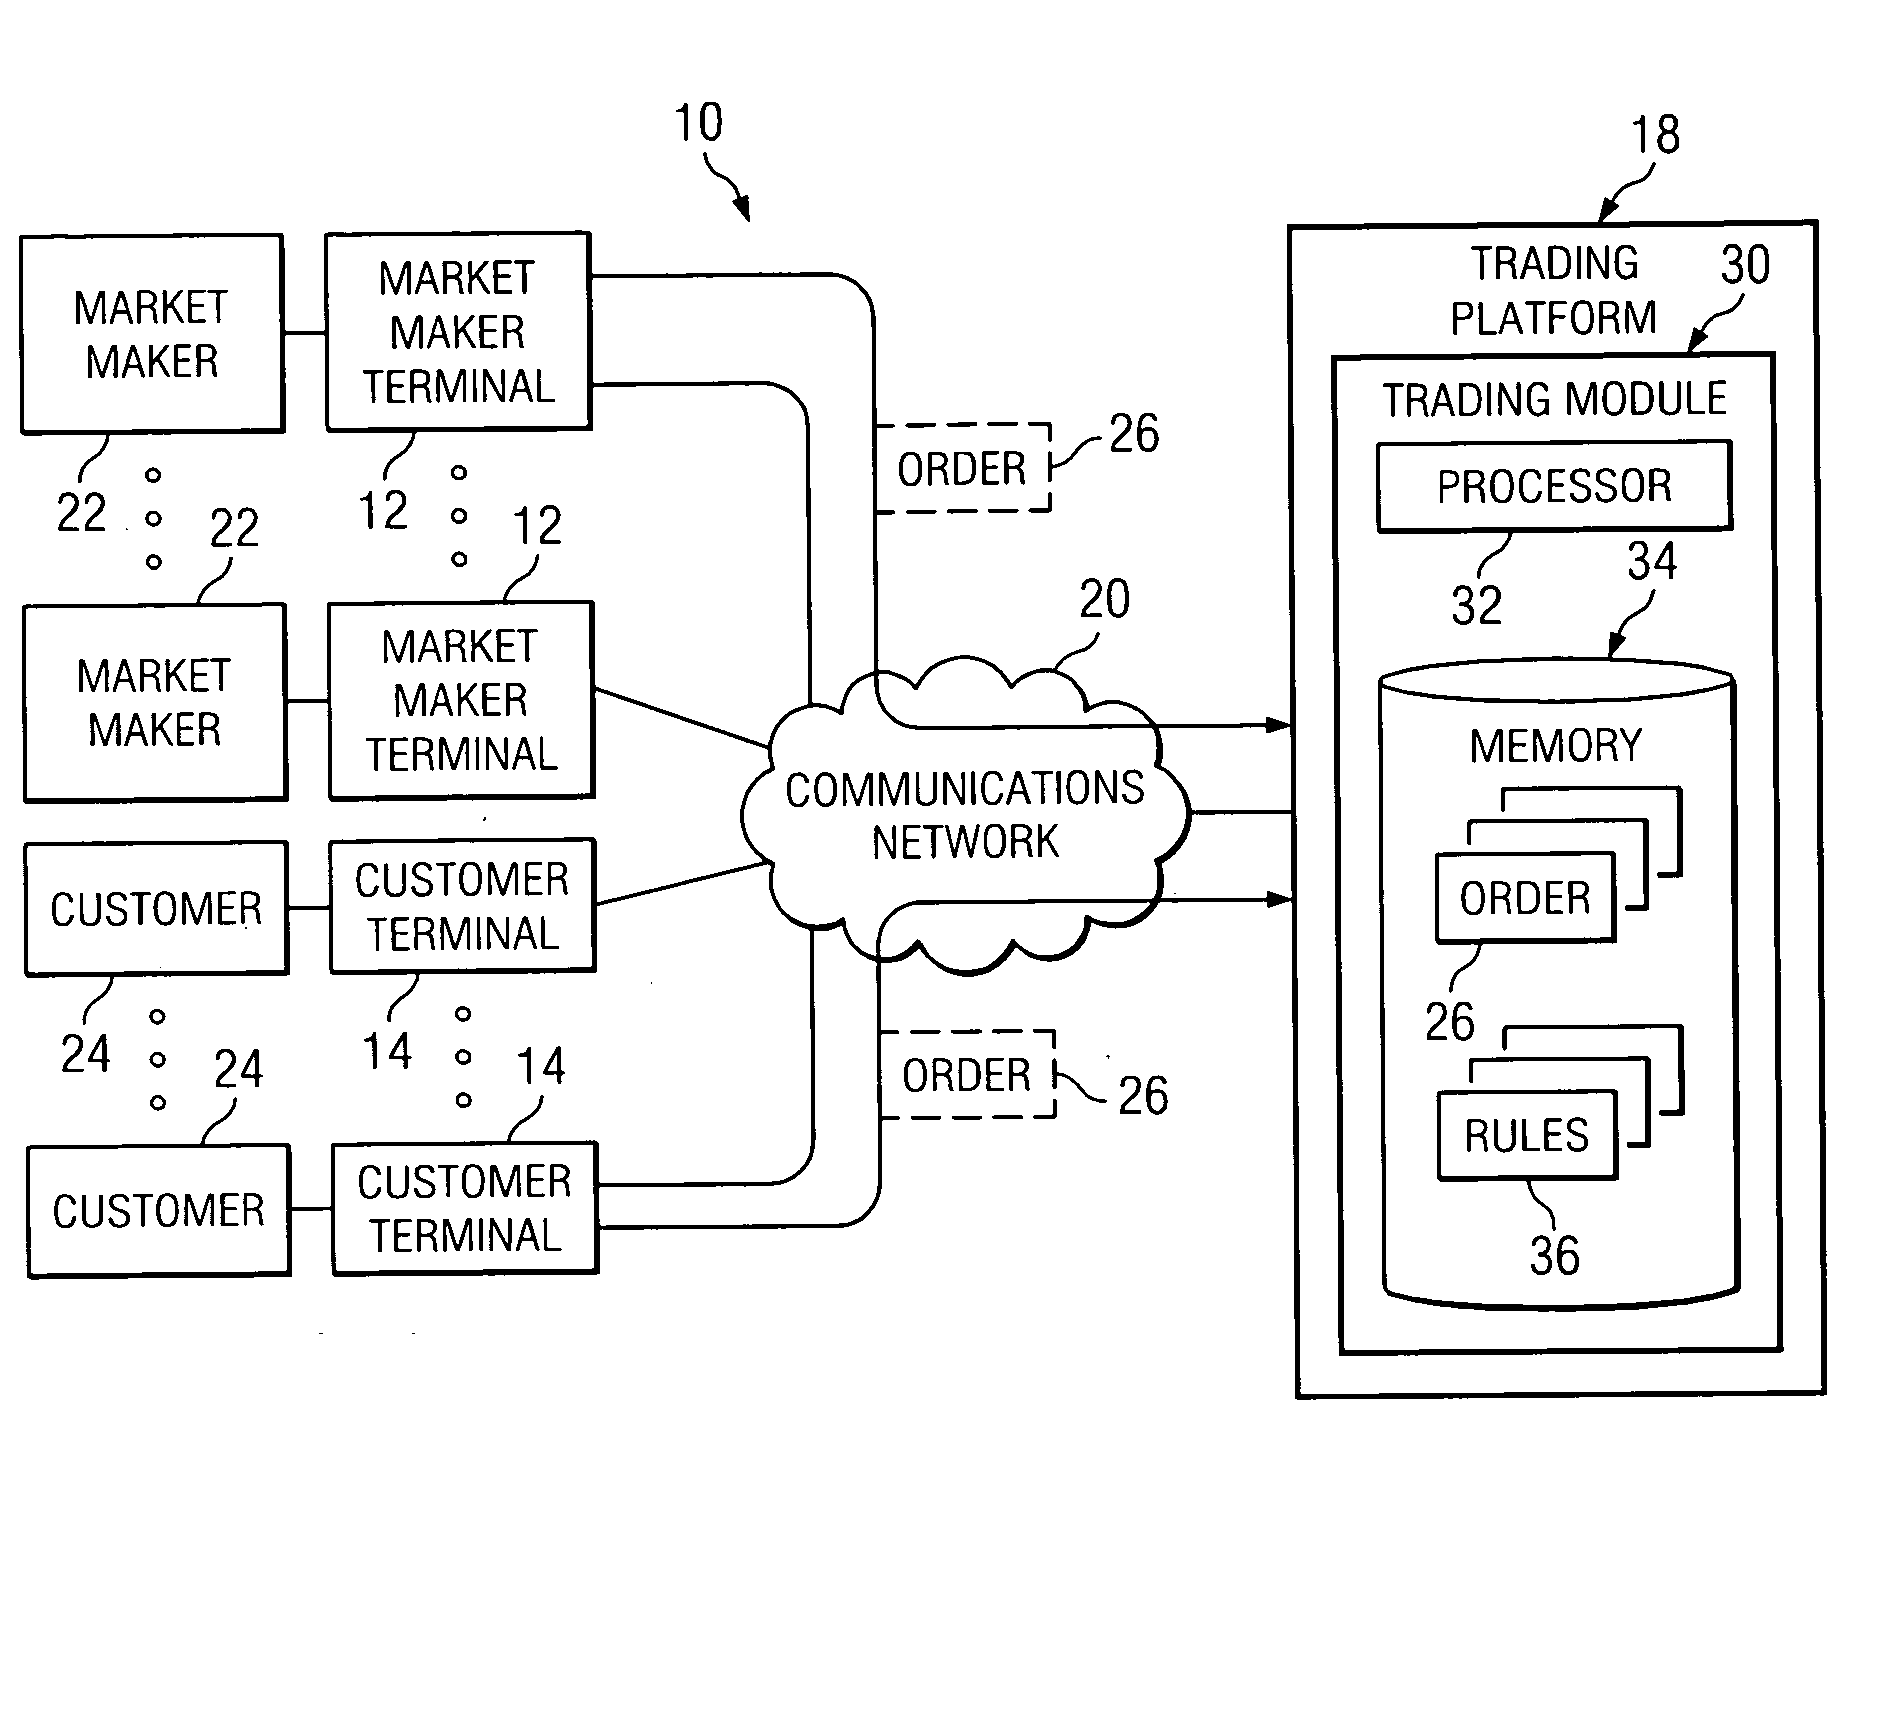 System and method for managing trading orders received from market makers